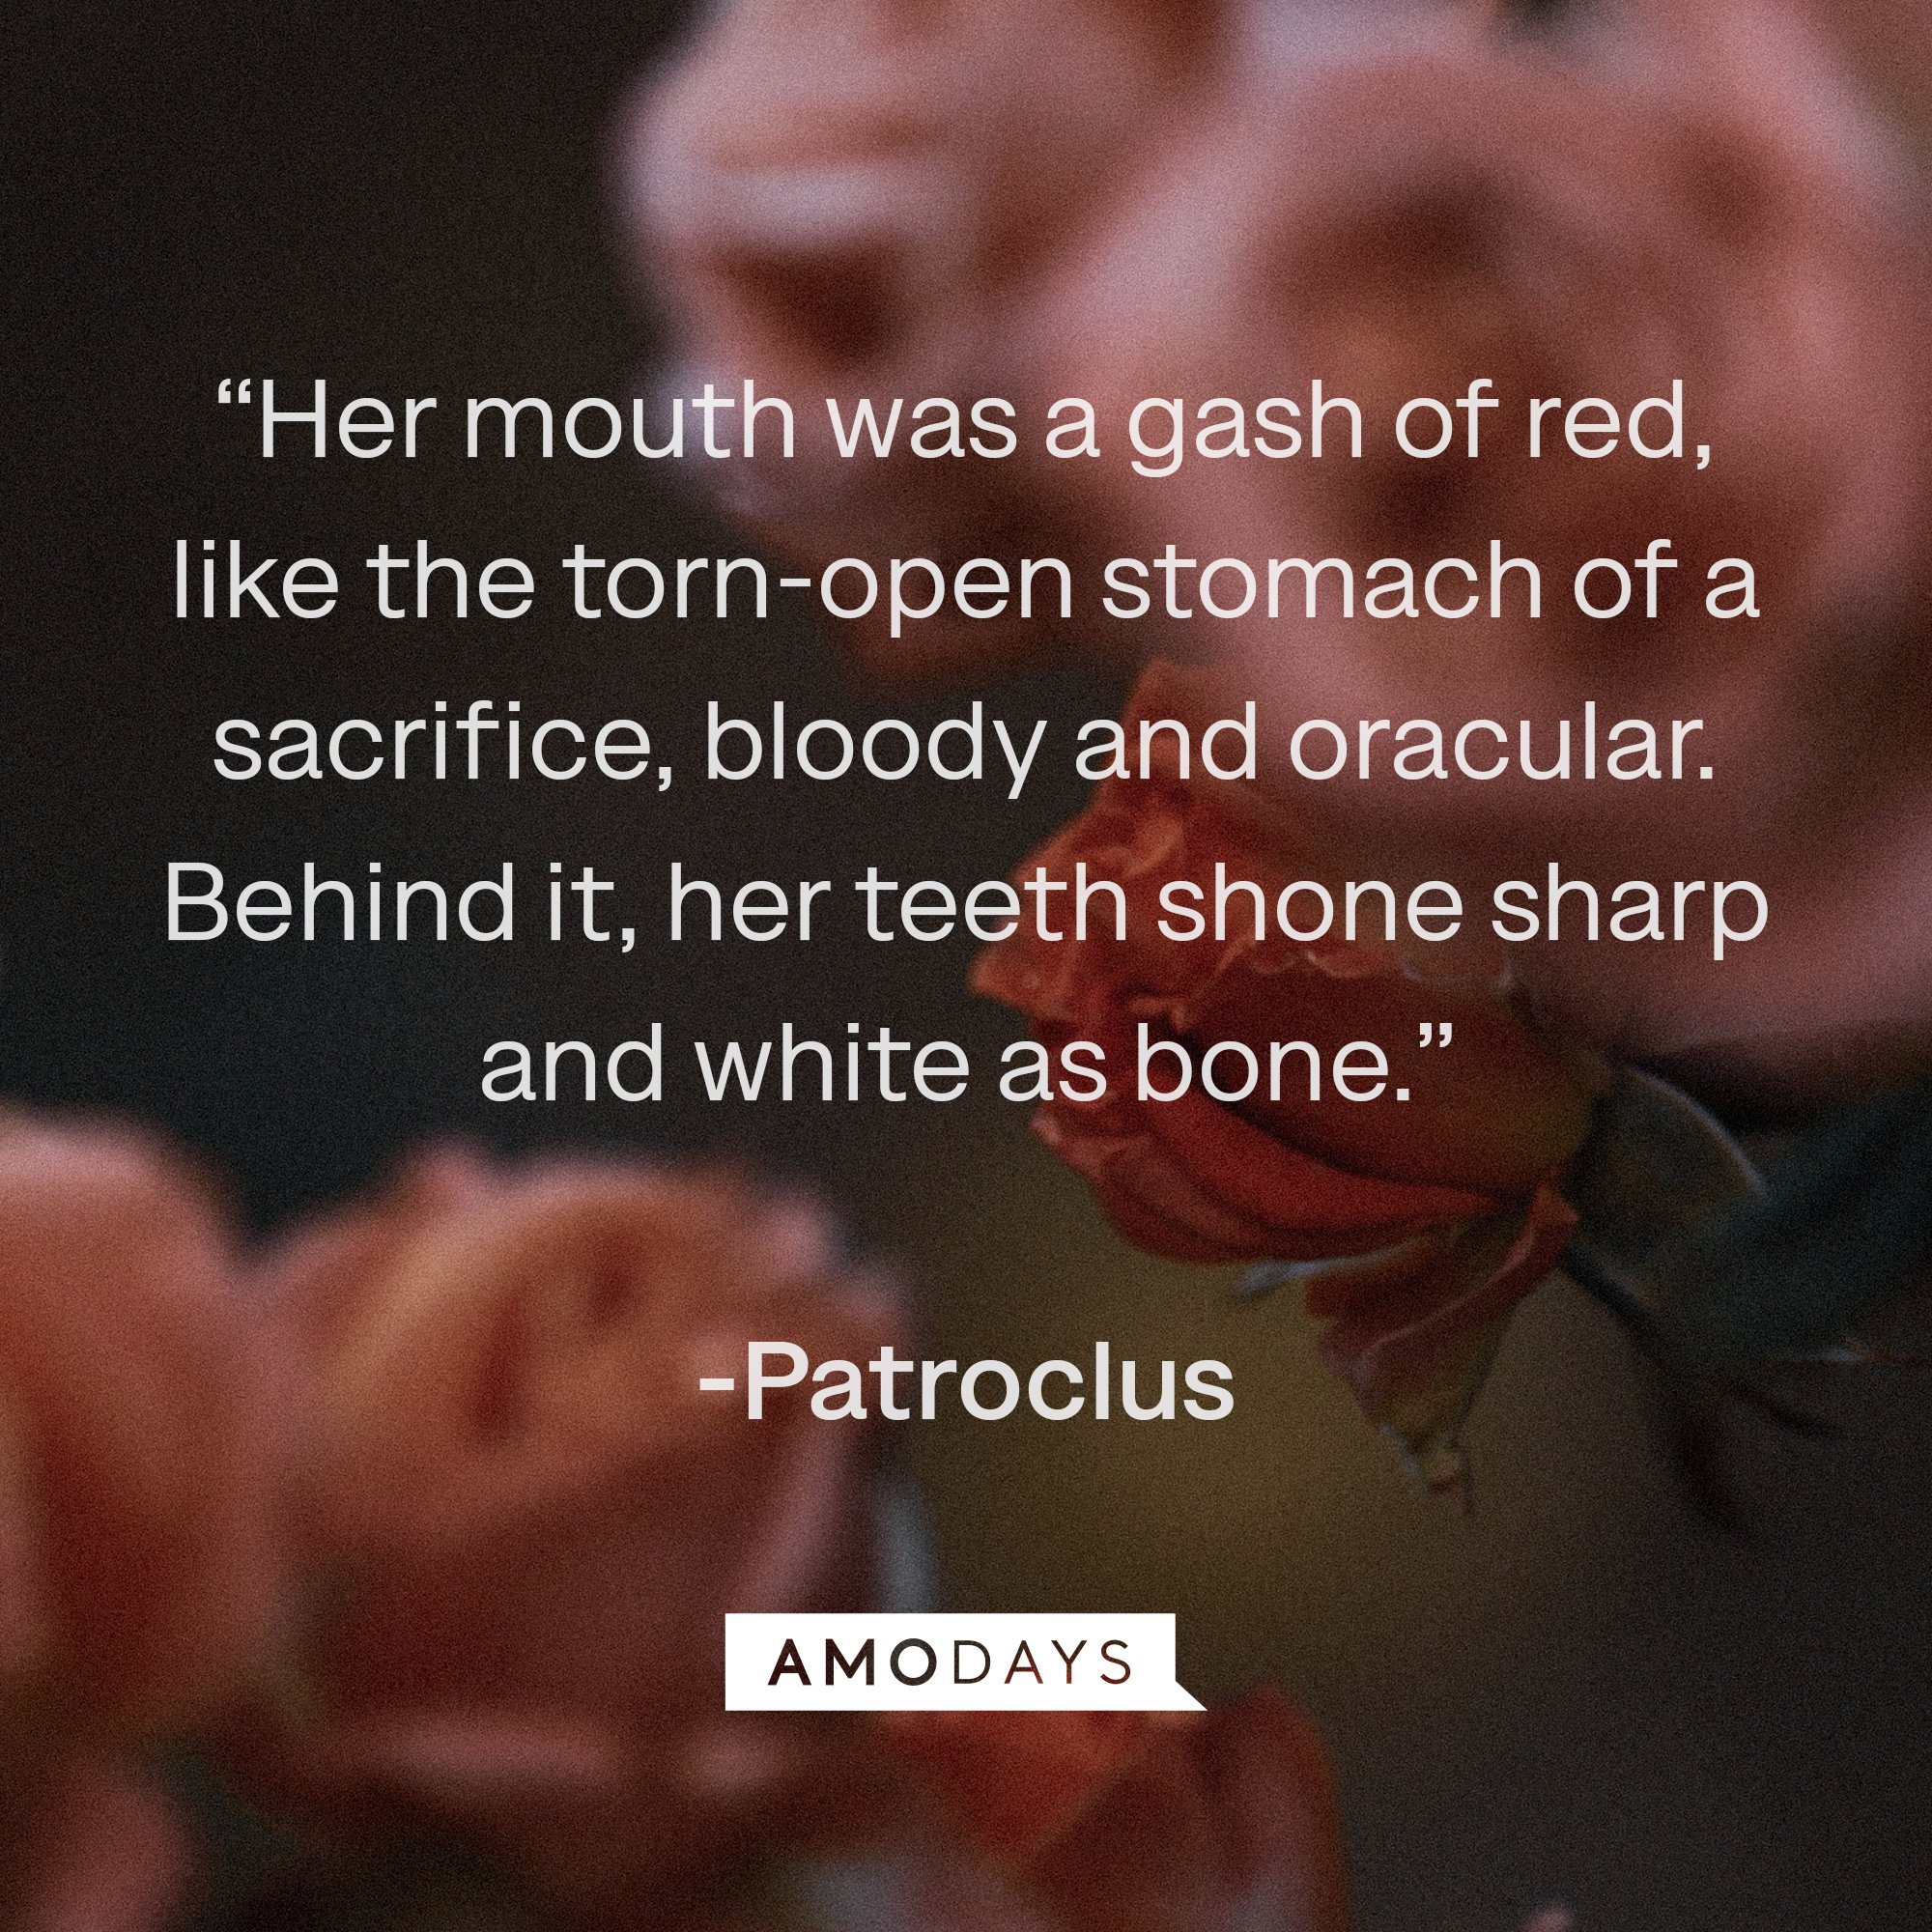  Patroclus's quote: “Her mouth was a gash of red, like the torn-open stomach of a sacrifice, bloody and oracular. Behind it, her teeth shone sharp and white as bone.” | Image: AmoDays